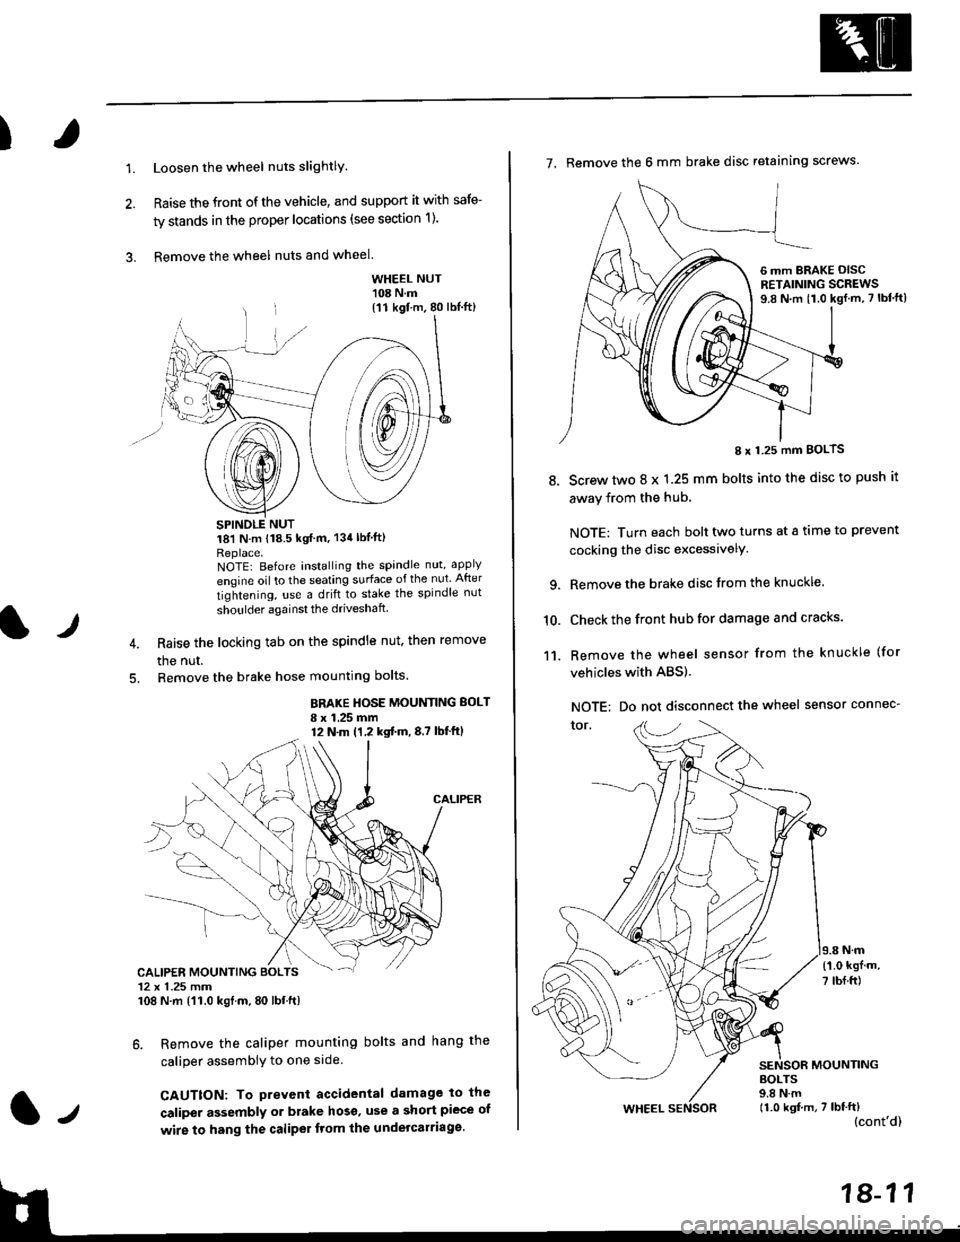 HONDA CIVIC 1997 6.G Owners Manual )
1.Loosen the wheel nuts slightlY.
Raise the front of the vehicle, and support it with safe-
ty stands in the proper locations (see section 1).
Remove the wheel nuts and wheel.3.
l)
WHEEL NUT108 N.m